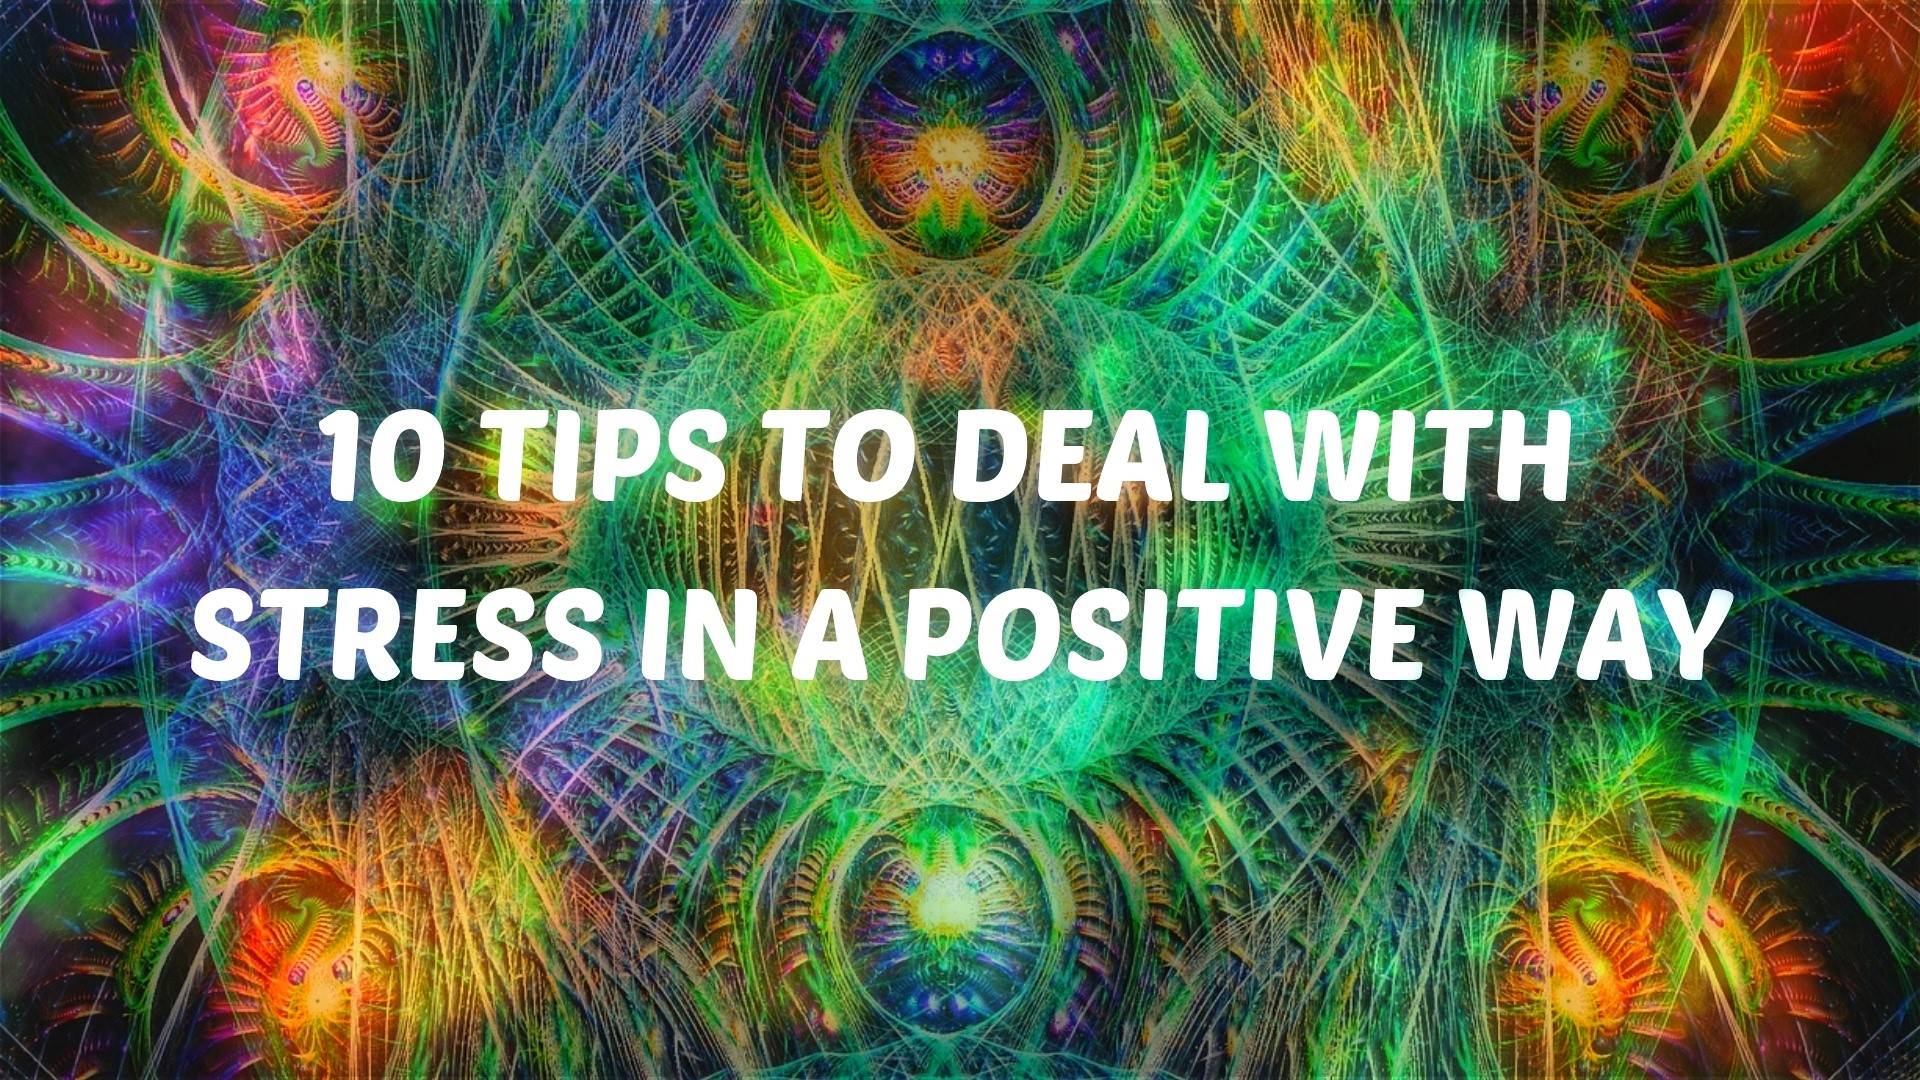 10 Tips To Deal With Stress in a Positive Way